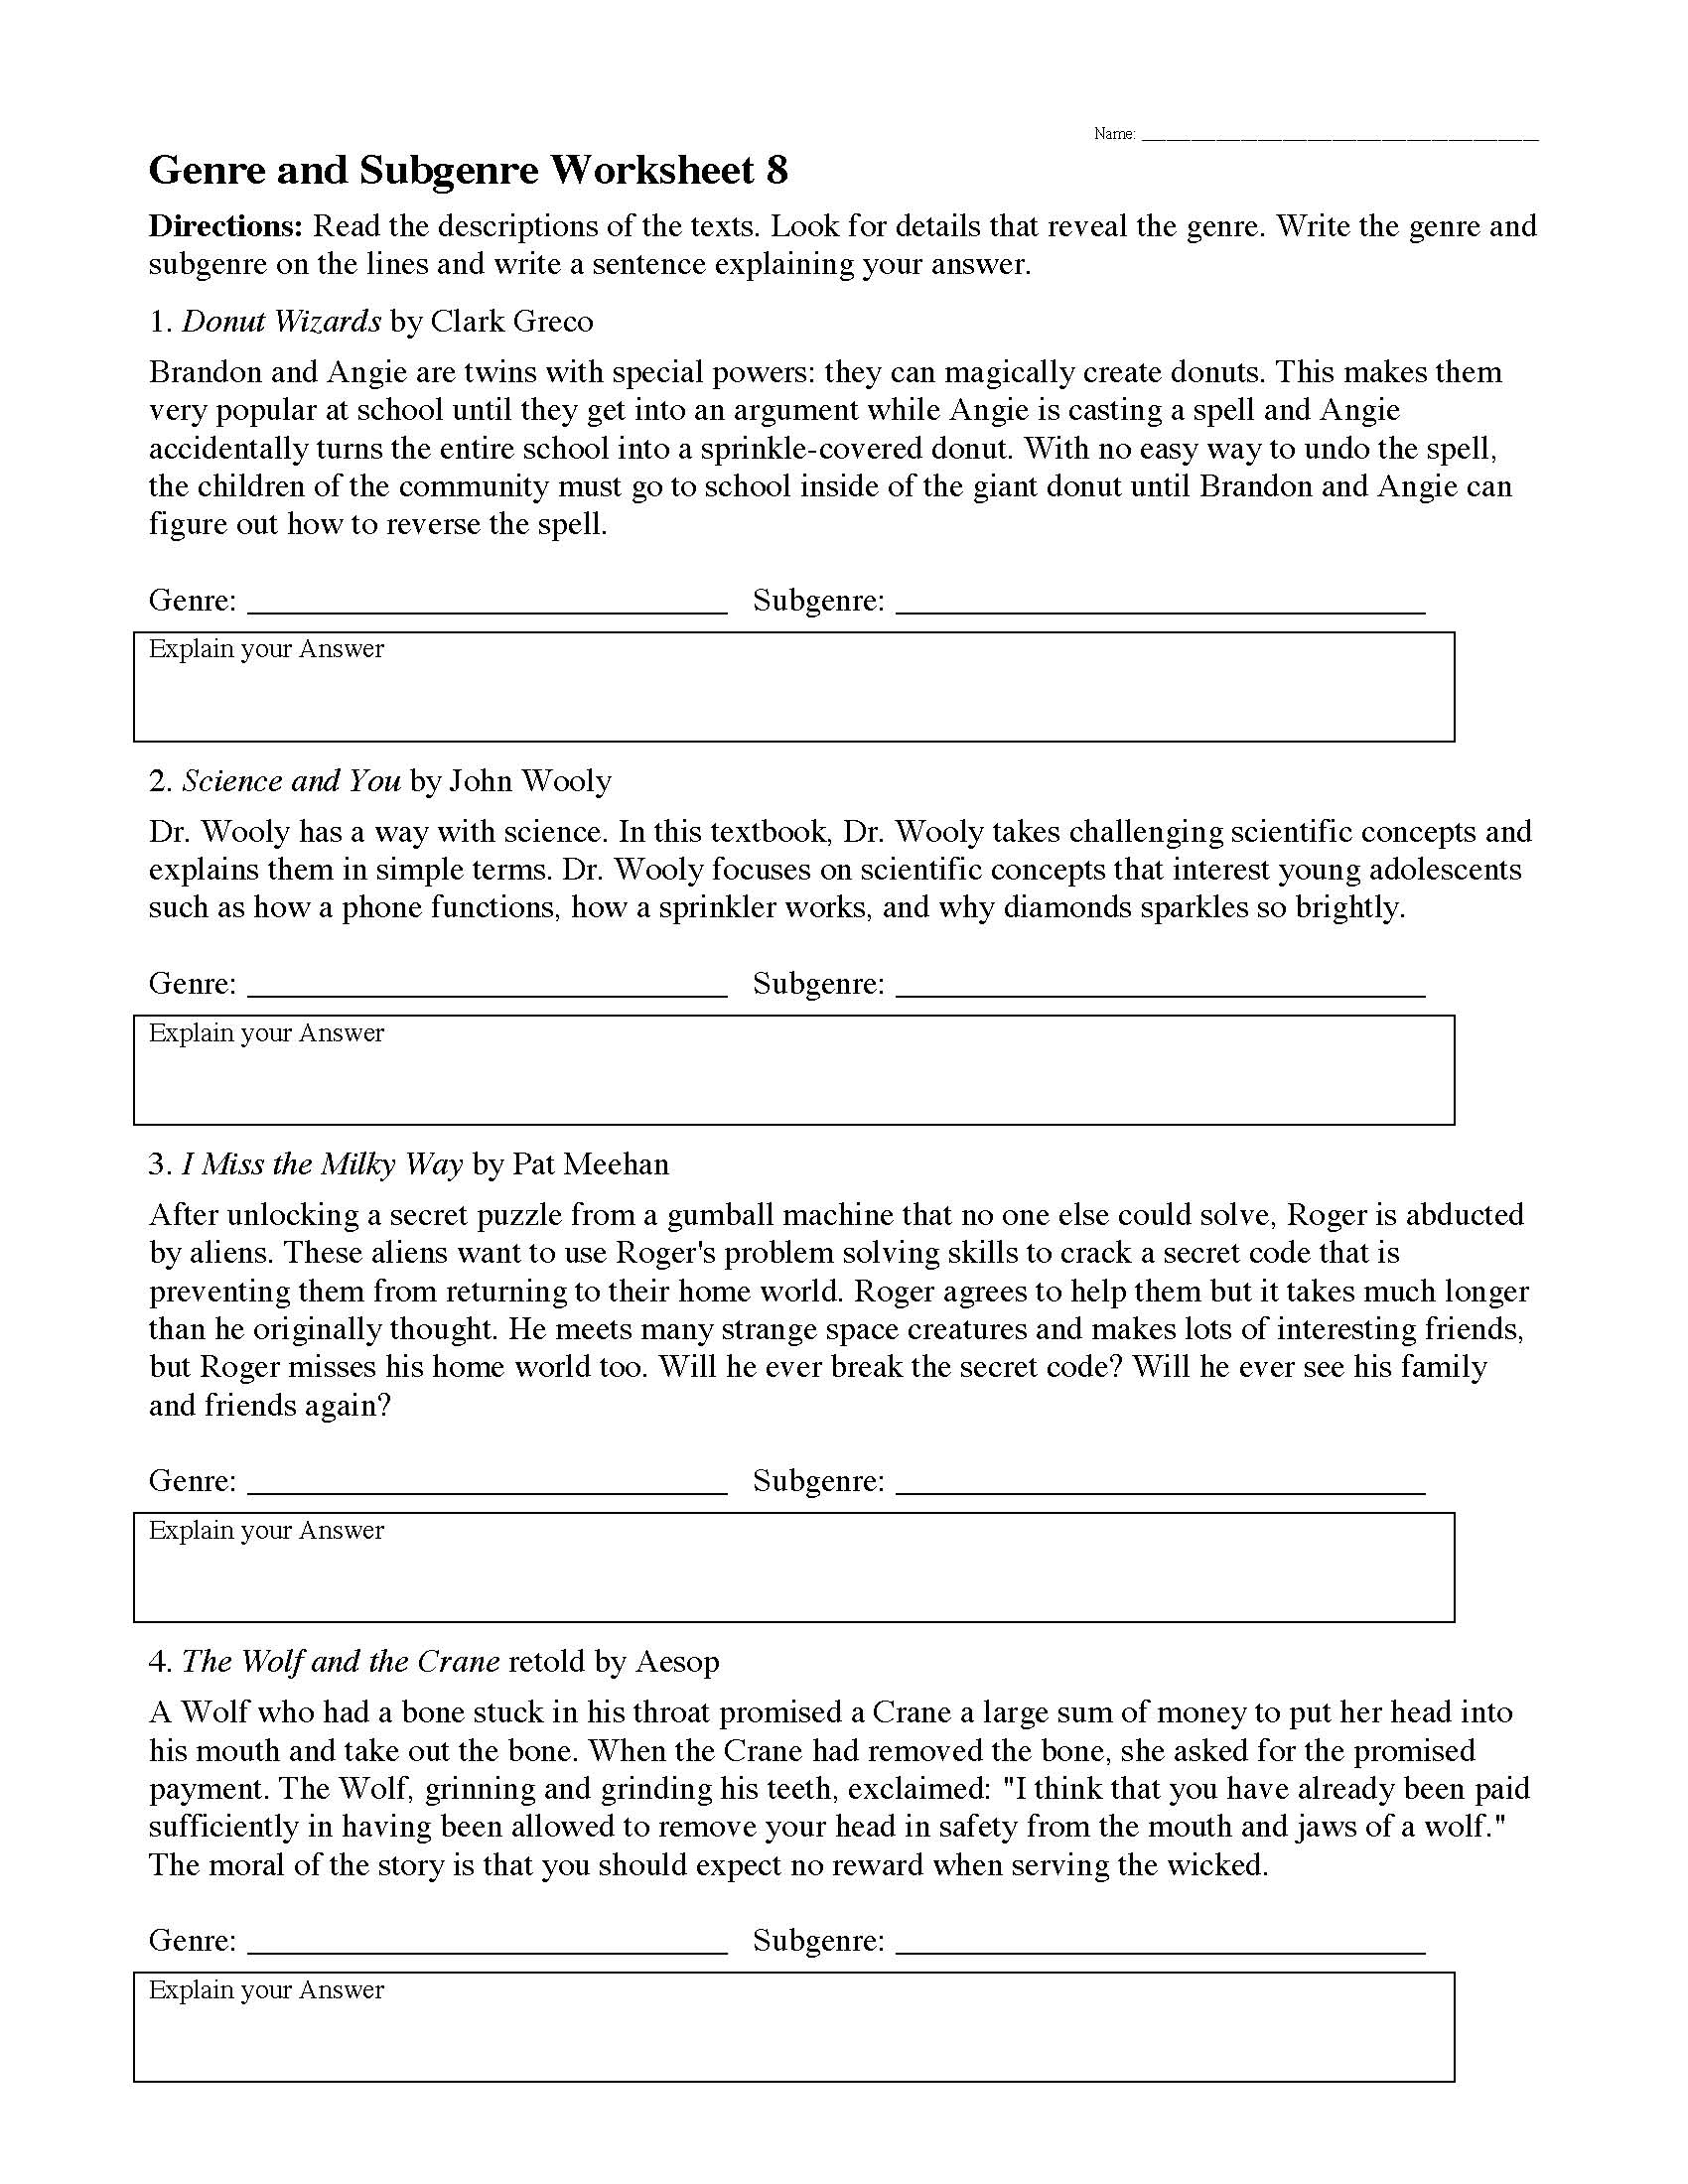 This is a preview image of Genre Worksheet 8. Click on it to enlarge it or view the source file.